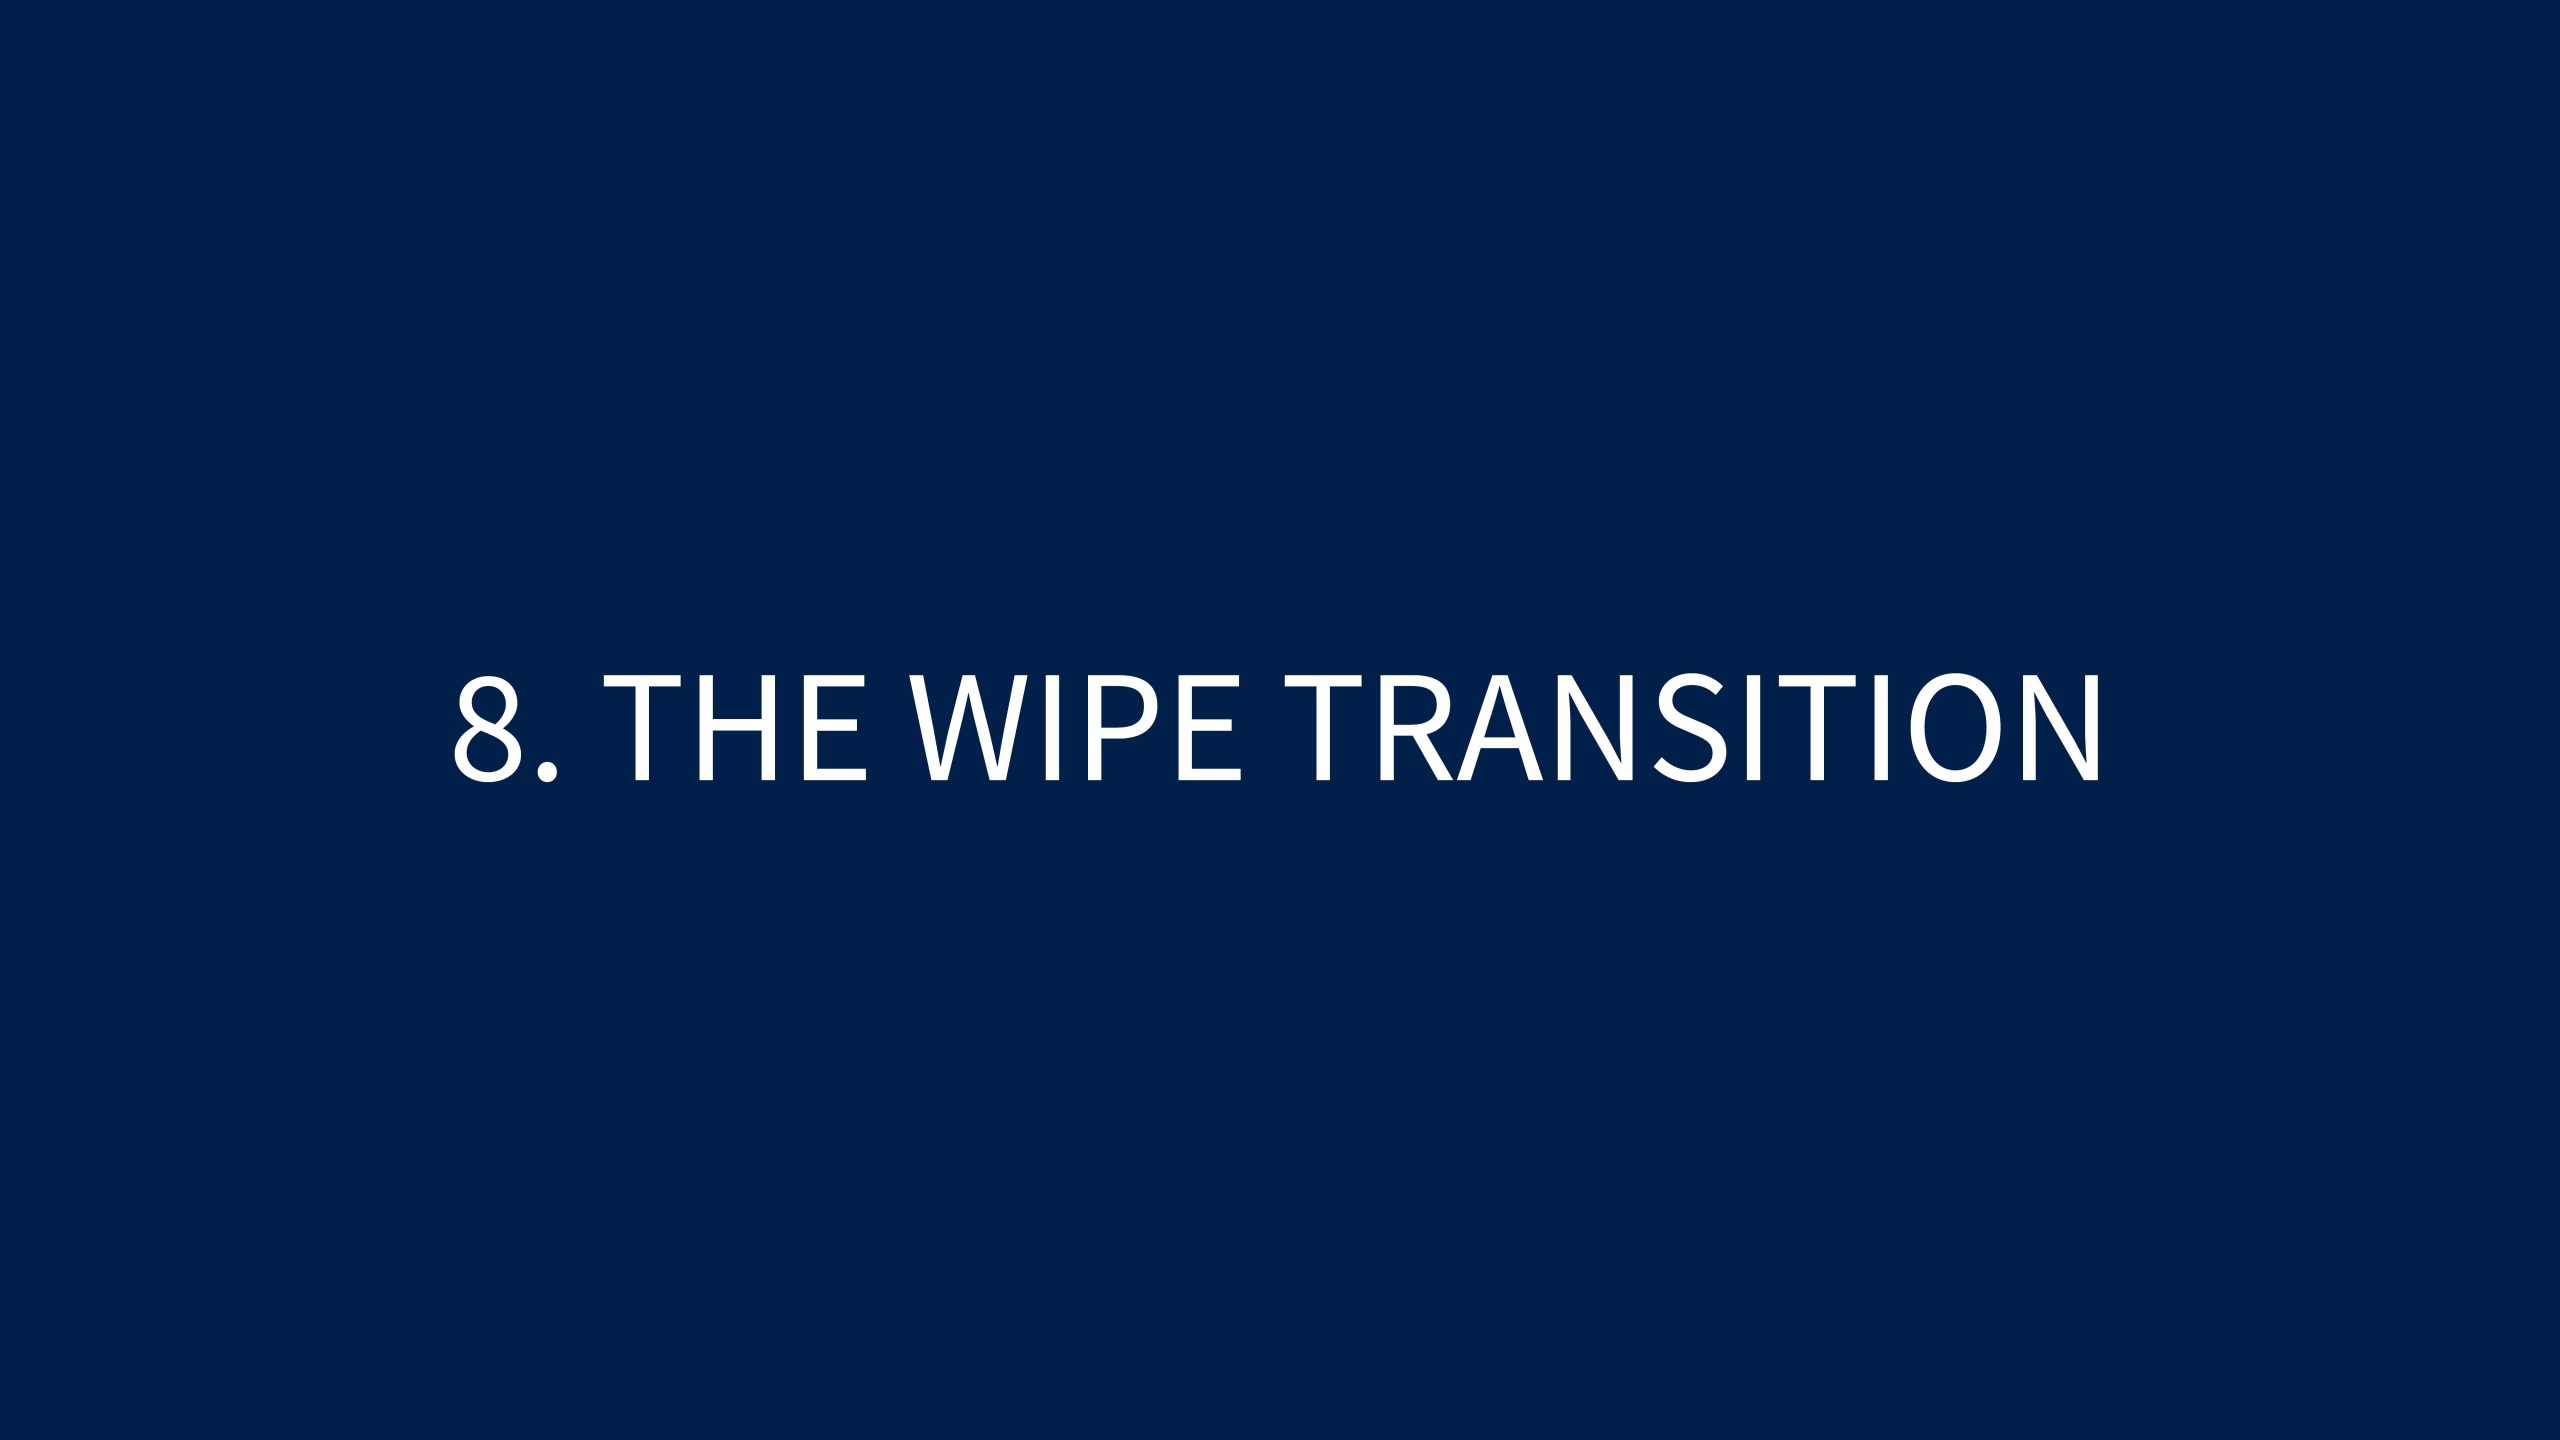 8 THE WIPE TRANSITION